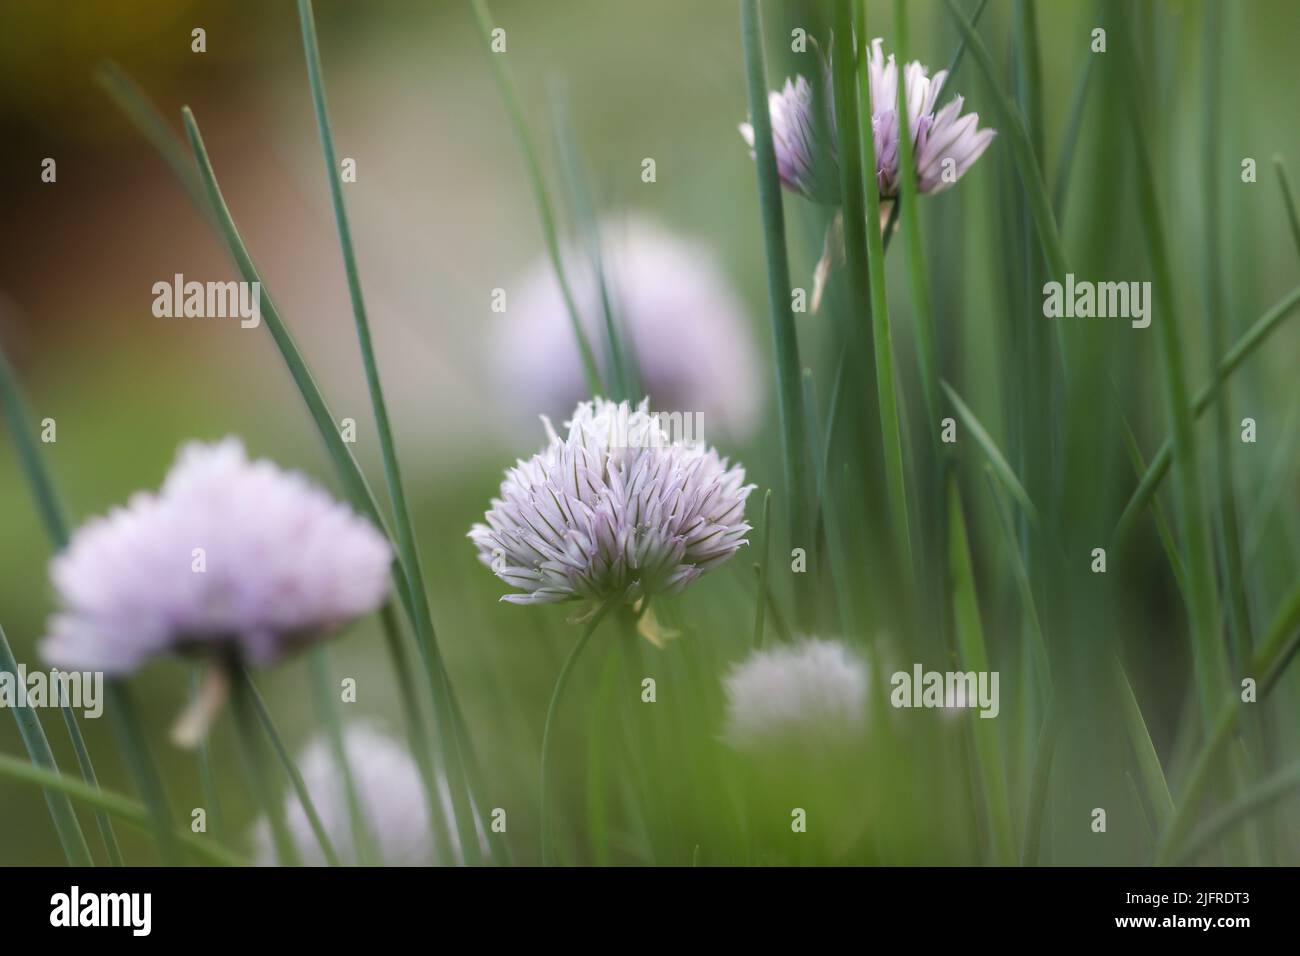 Chives Flower in Green Garden. Allium Schoenoprasum is a Species of Flowering Plant in the family Amaryllidaceae. Stock Photo